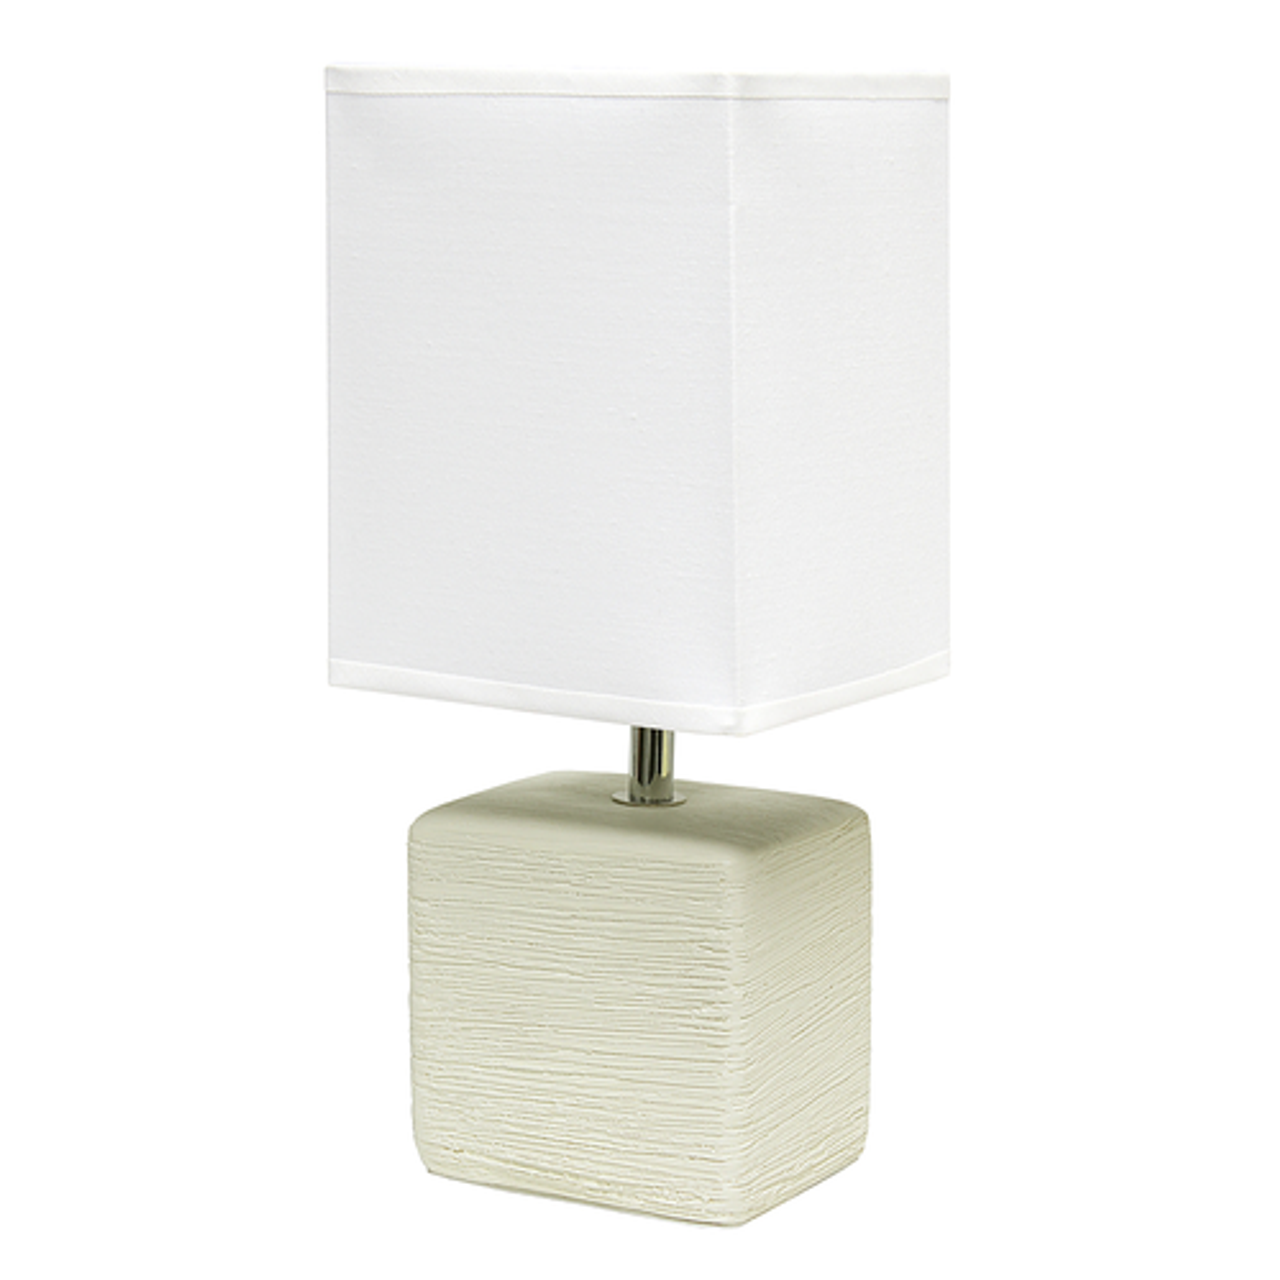 Simple Designs Petite Faux Stone Table Lamp with Fabric Shade, OffWhite with White Shade - Off White base/White shade